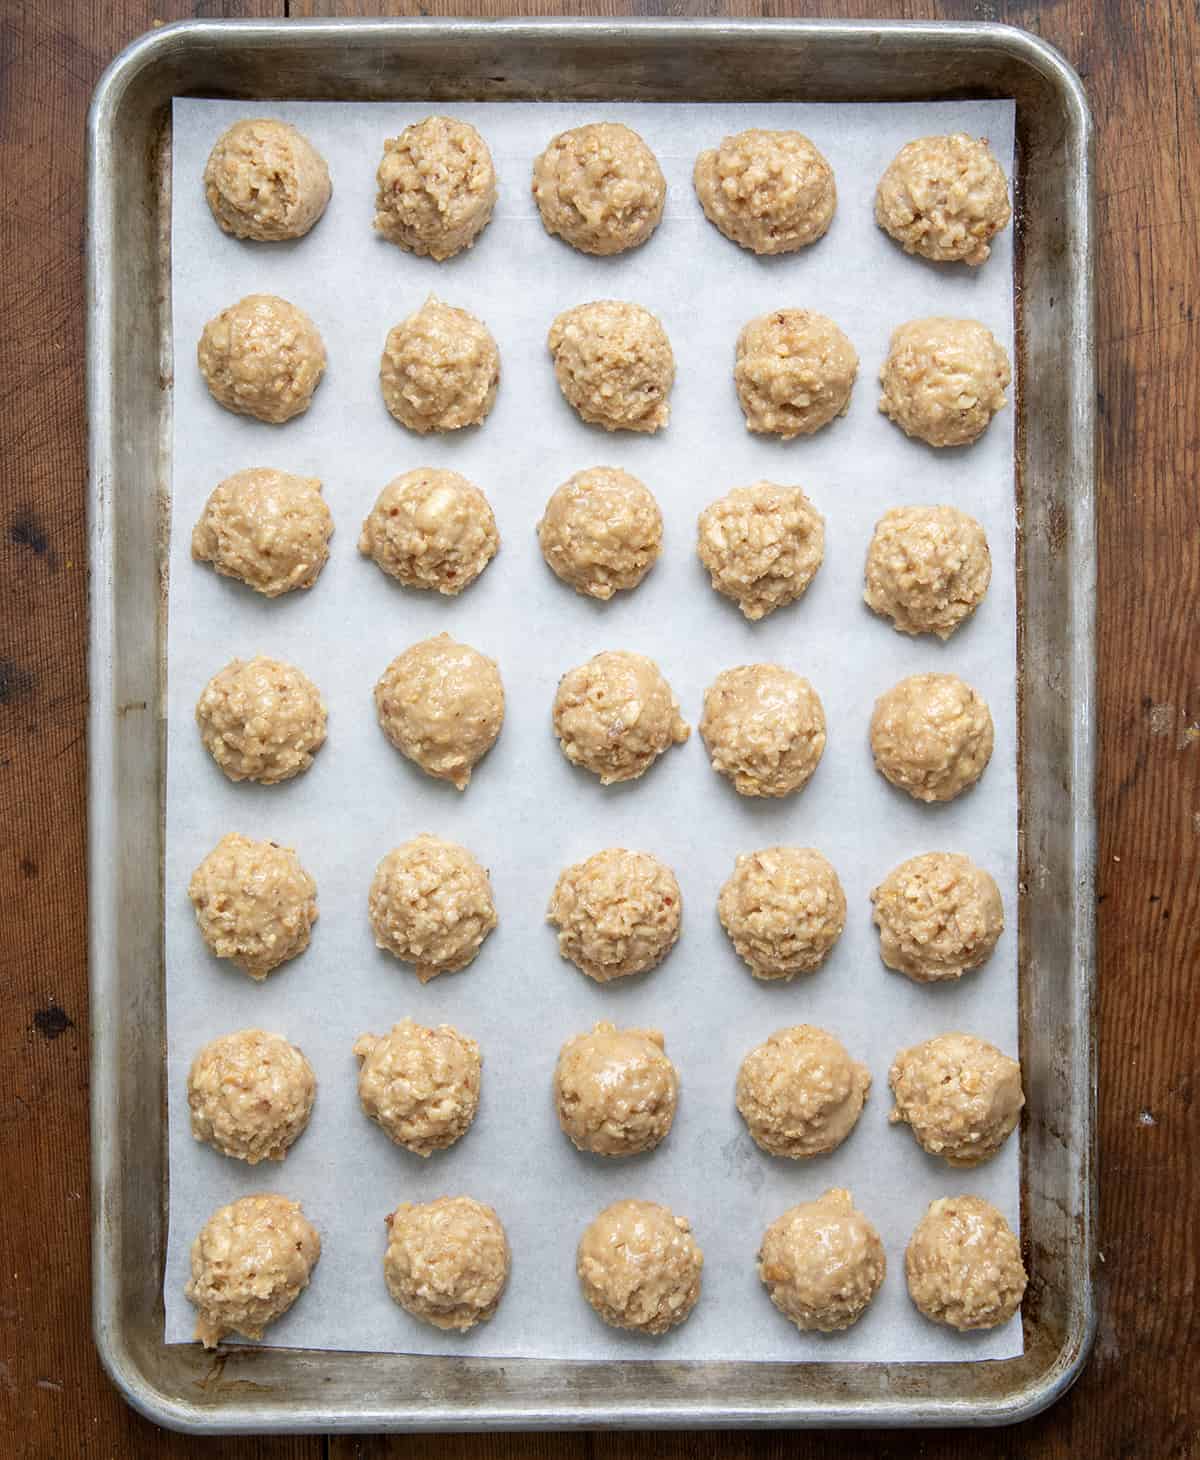 $300 Candy, or graham cracker candy, balls on a sheet pan from overhead.